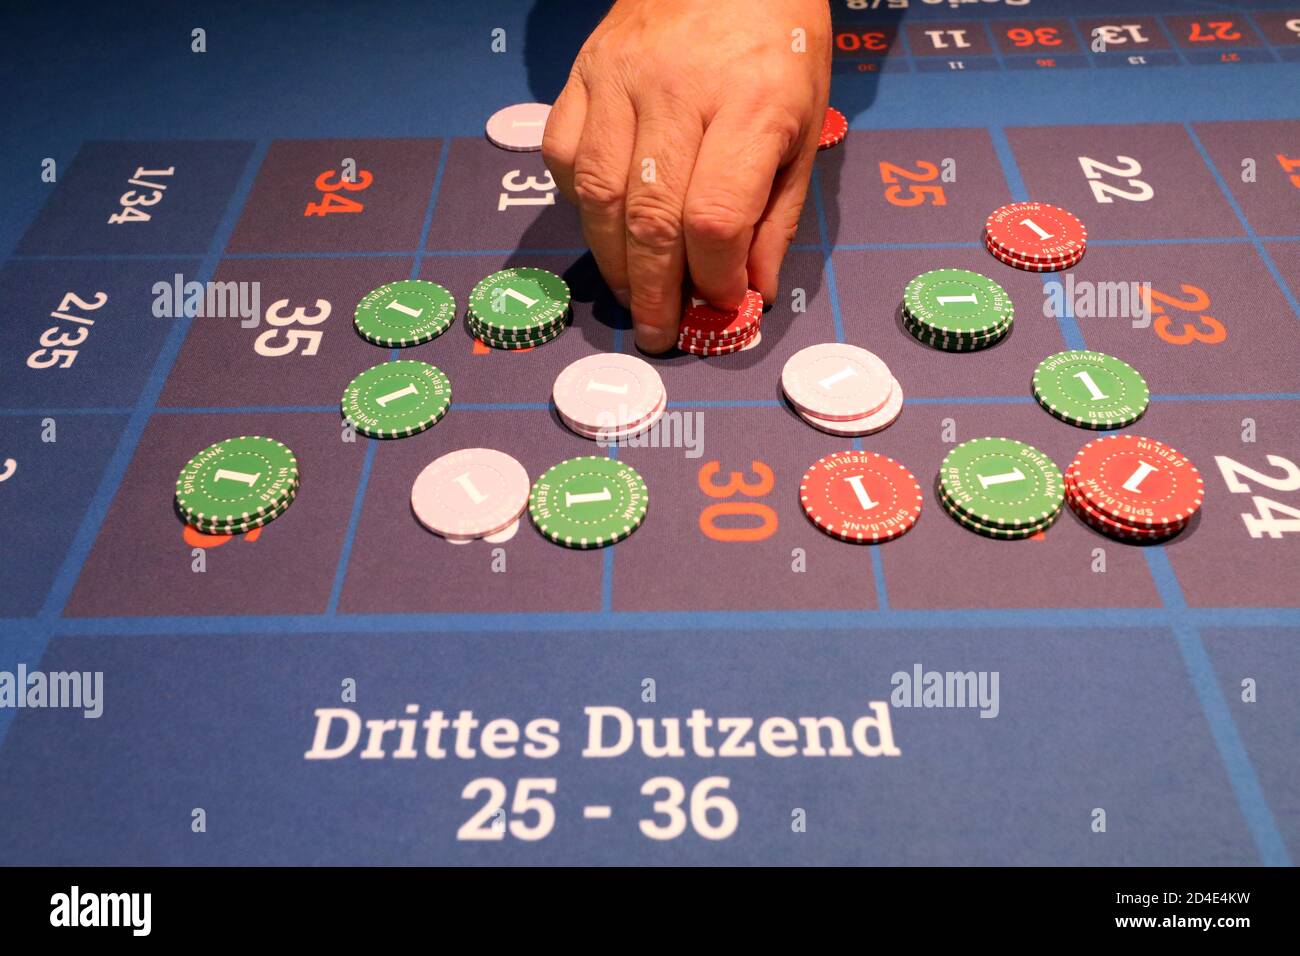 Rostock, Germany. 07th Oct, 2020. In the casino, the ball is at the number  17 in roulette, and for some months now the casinos in  Mecklenburg-Vorpommern have been reopening. They register approximately